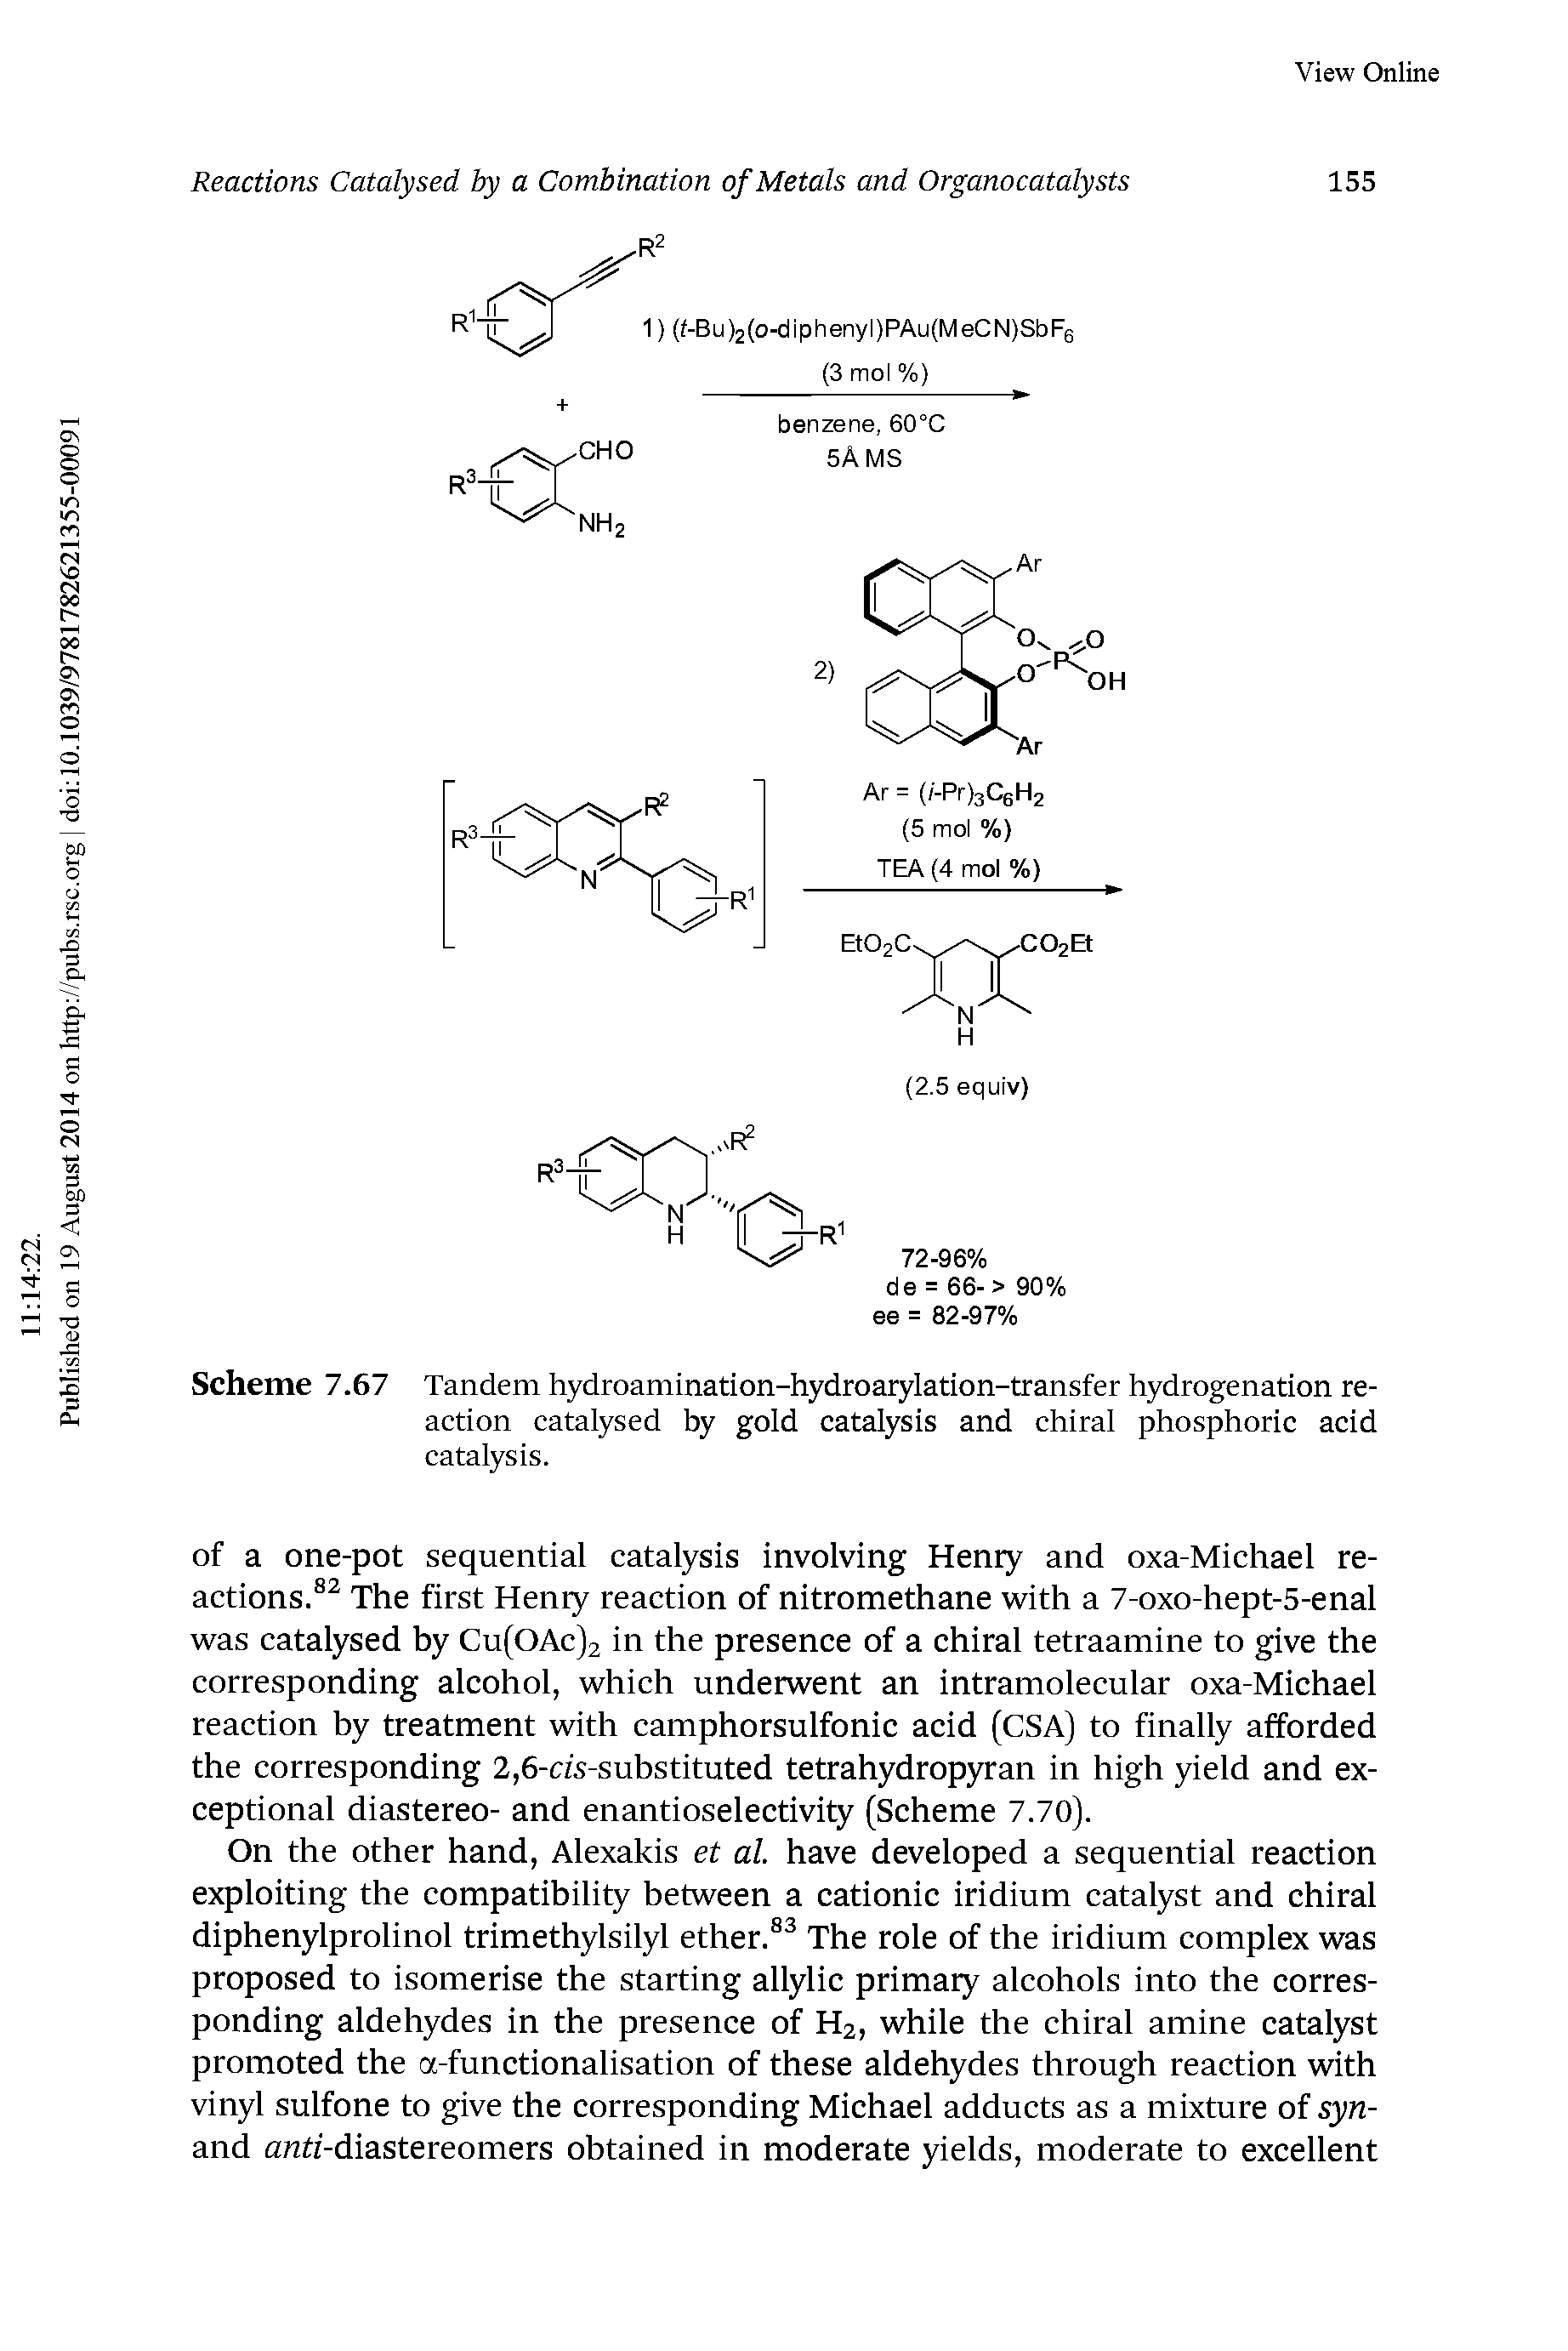 Scheme 7.67 Tandem hydroamination-hydroarylation-transfer hydrogenation reaction catalysed by gold catalysis and chiral phosphoric acid...